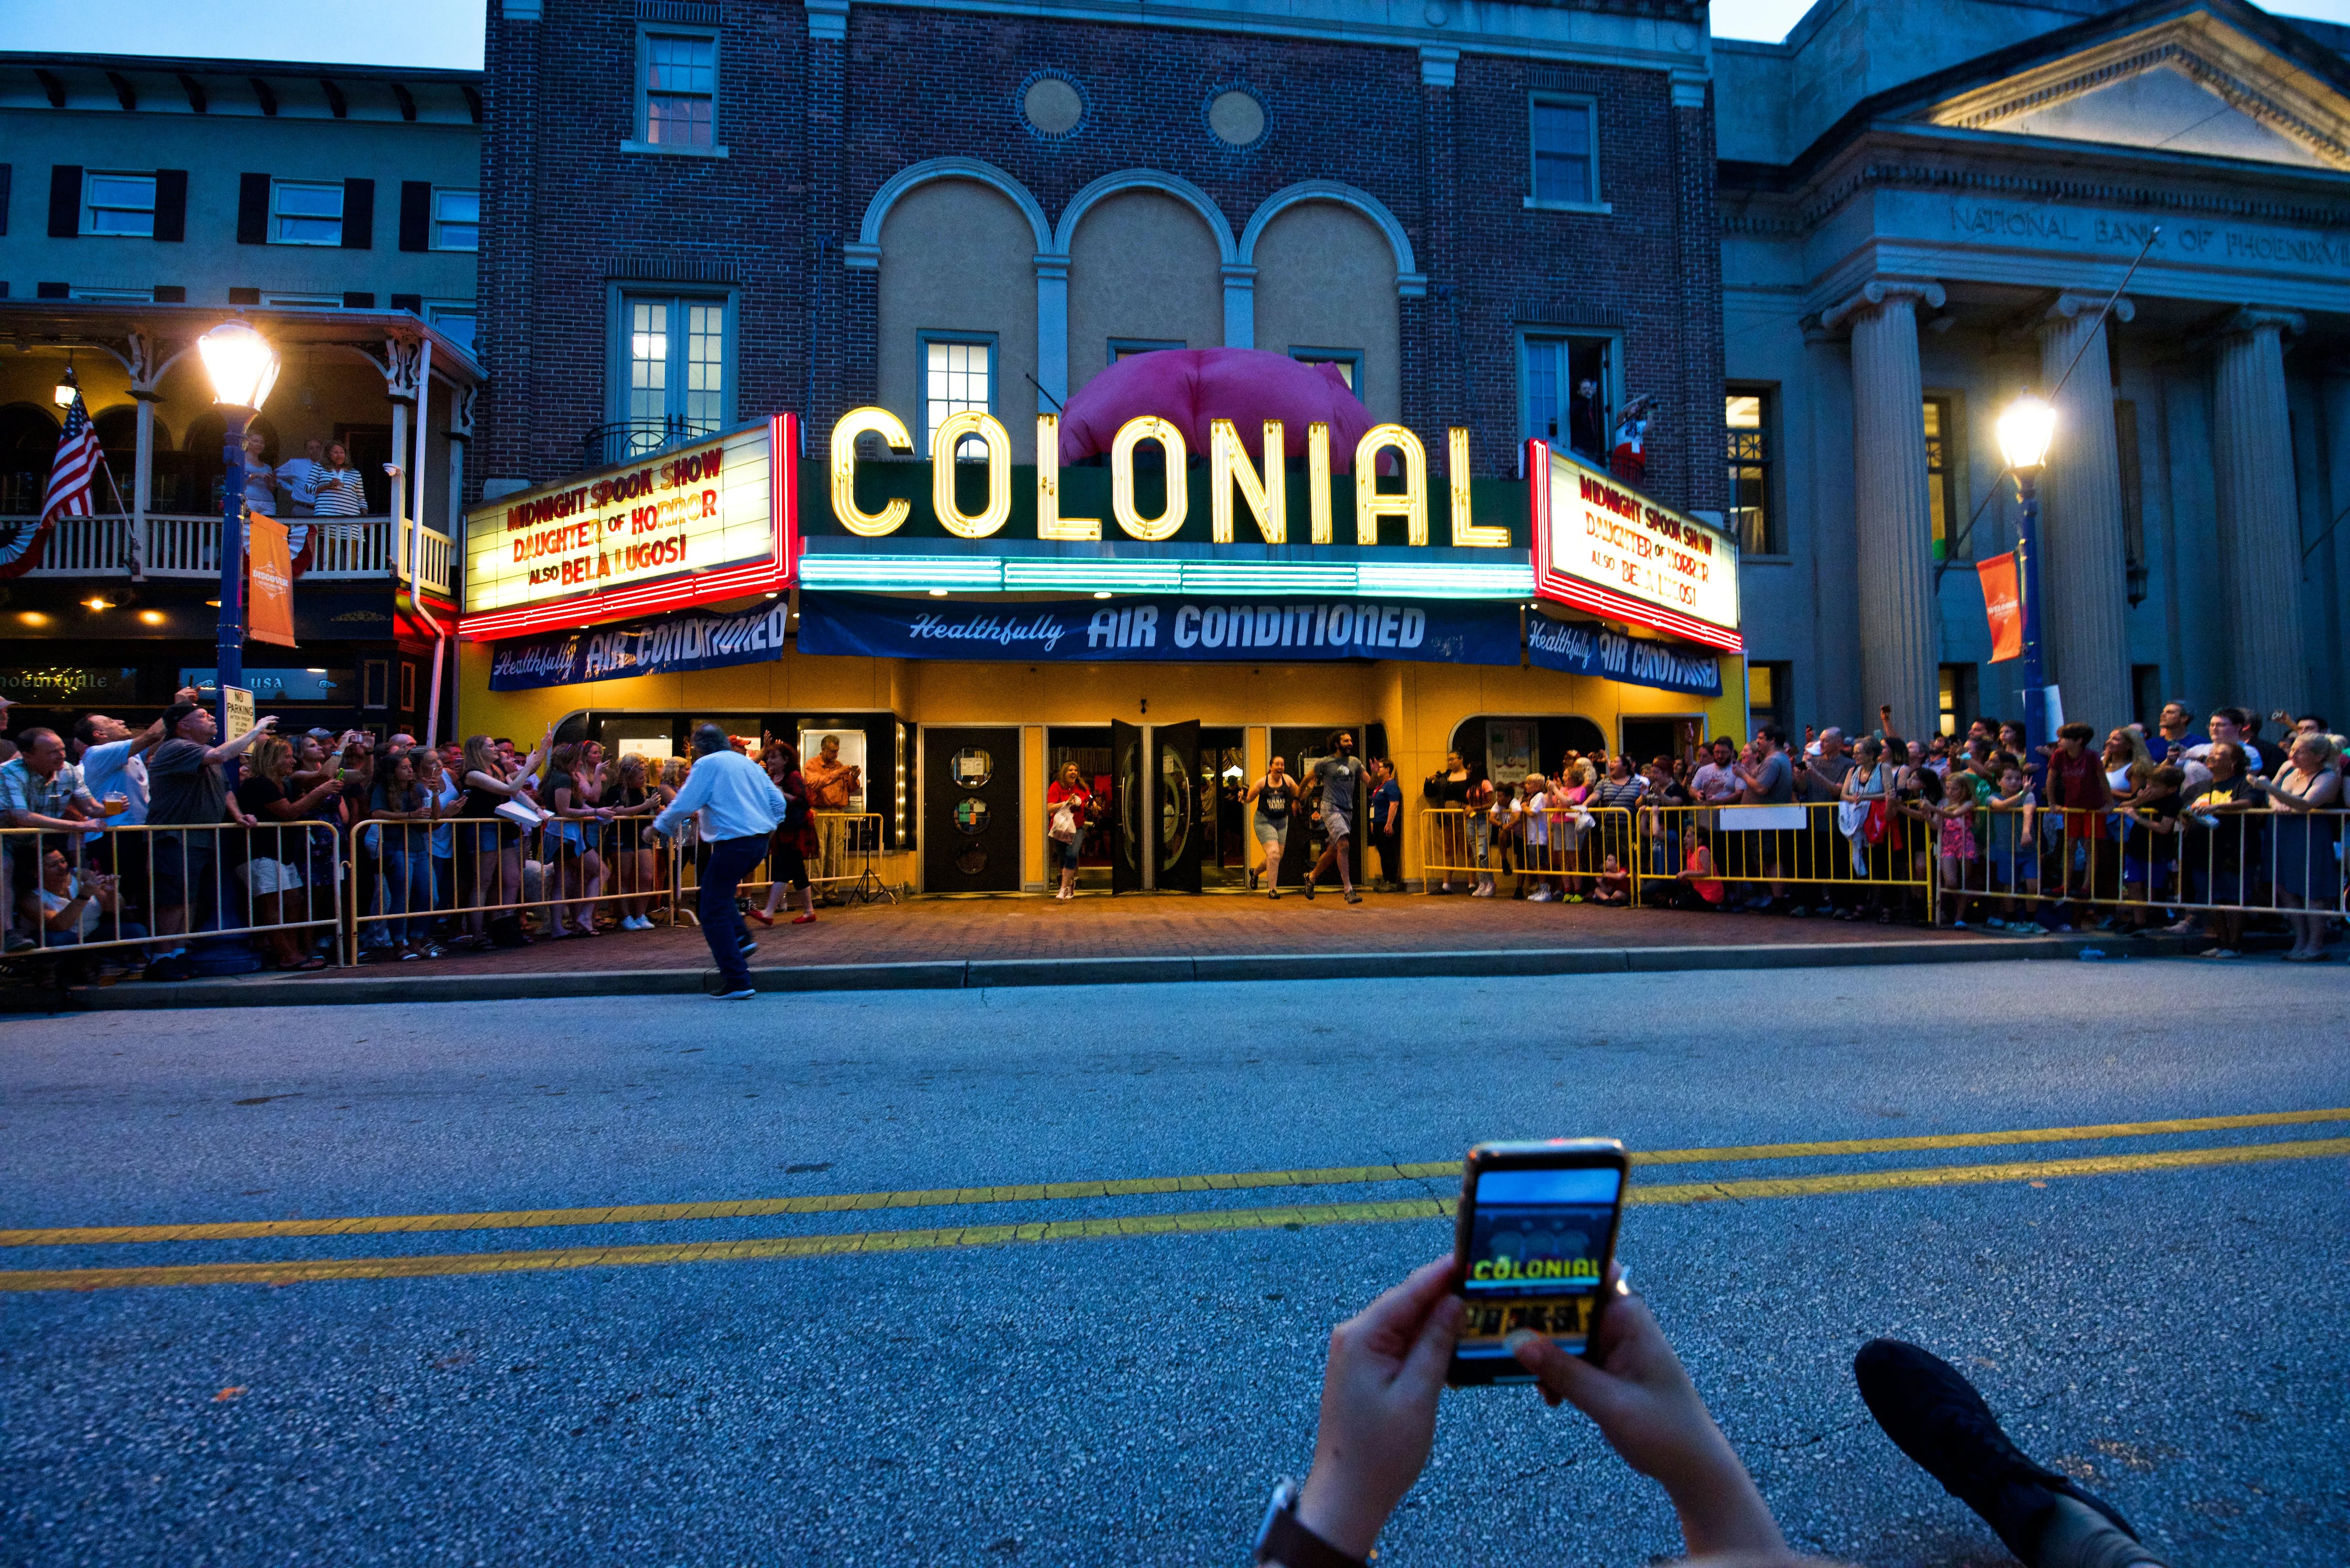 Established in 1903 as the “Colonial Opera House,” the Colonial Theatre is famous for enjoying pride of place in the 1958 Steve McQueen sci-fi comedy classic "The Blob."